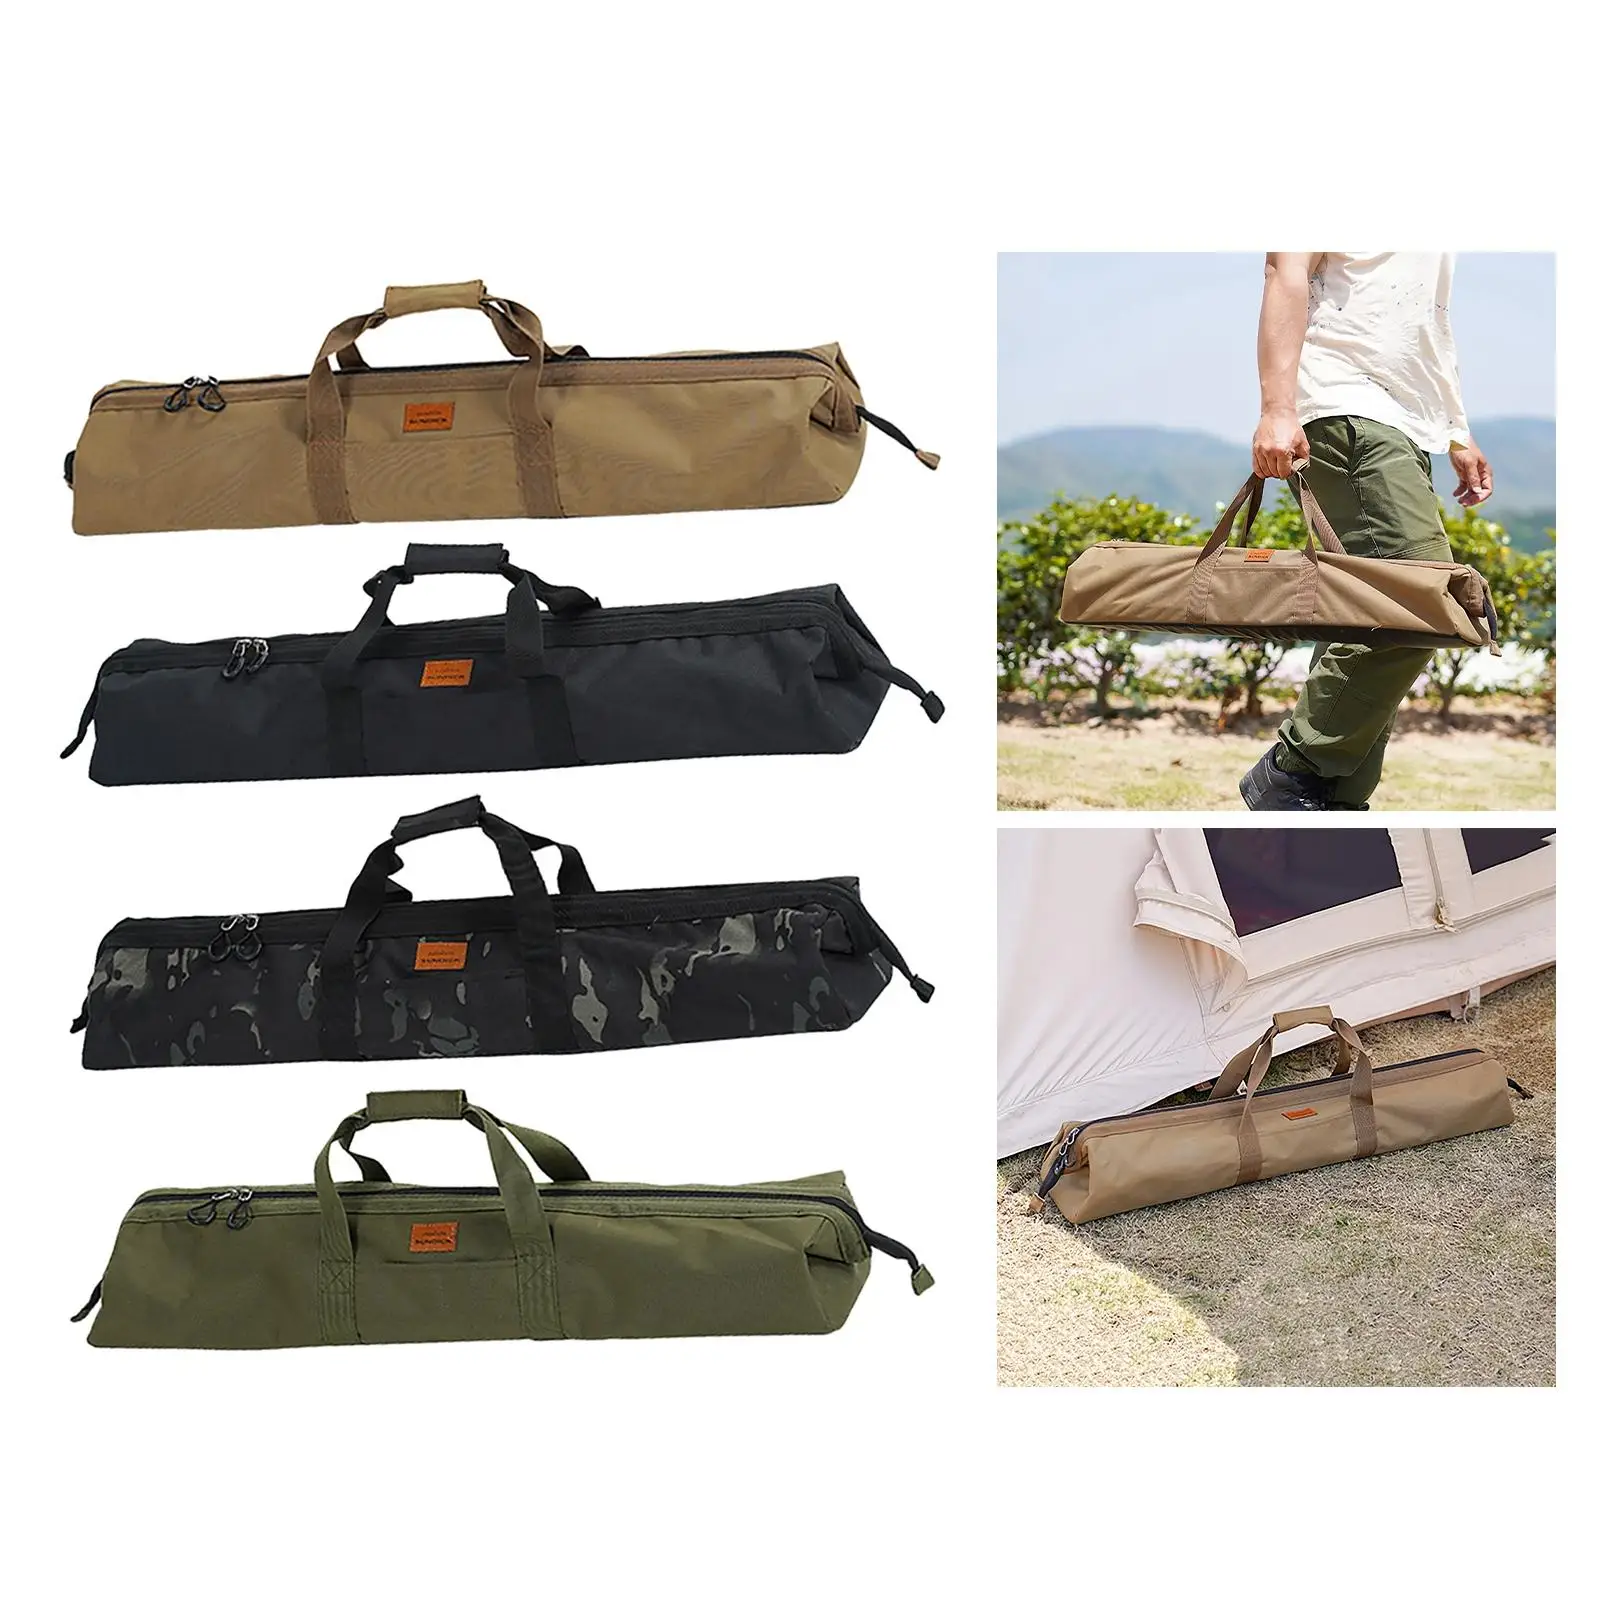 Canopy Pole Tarp Poles Camping Pole Storage Bag, Portable Tent Poles Carrying